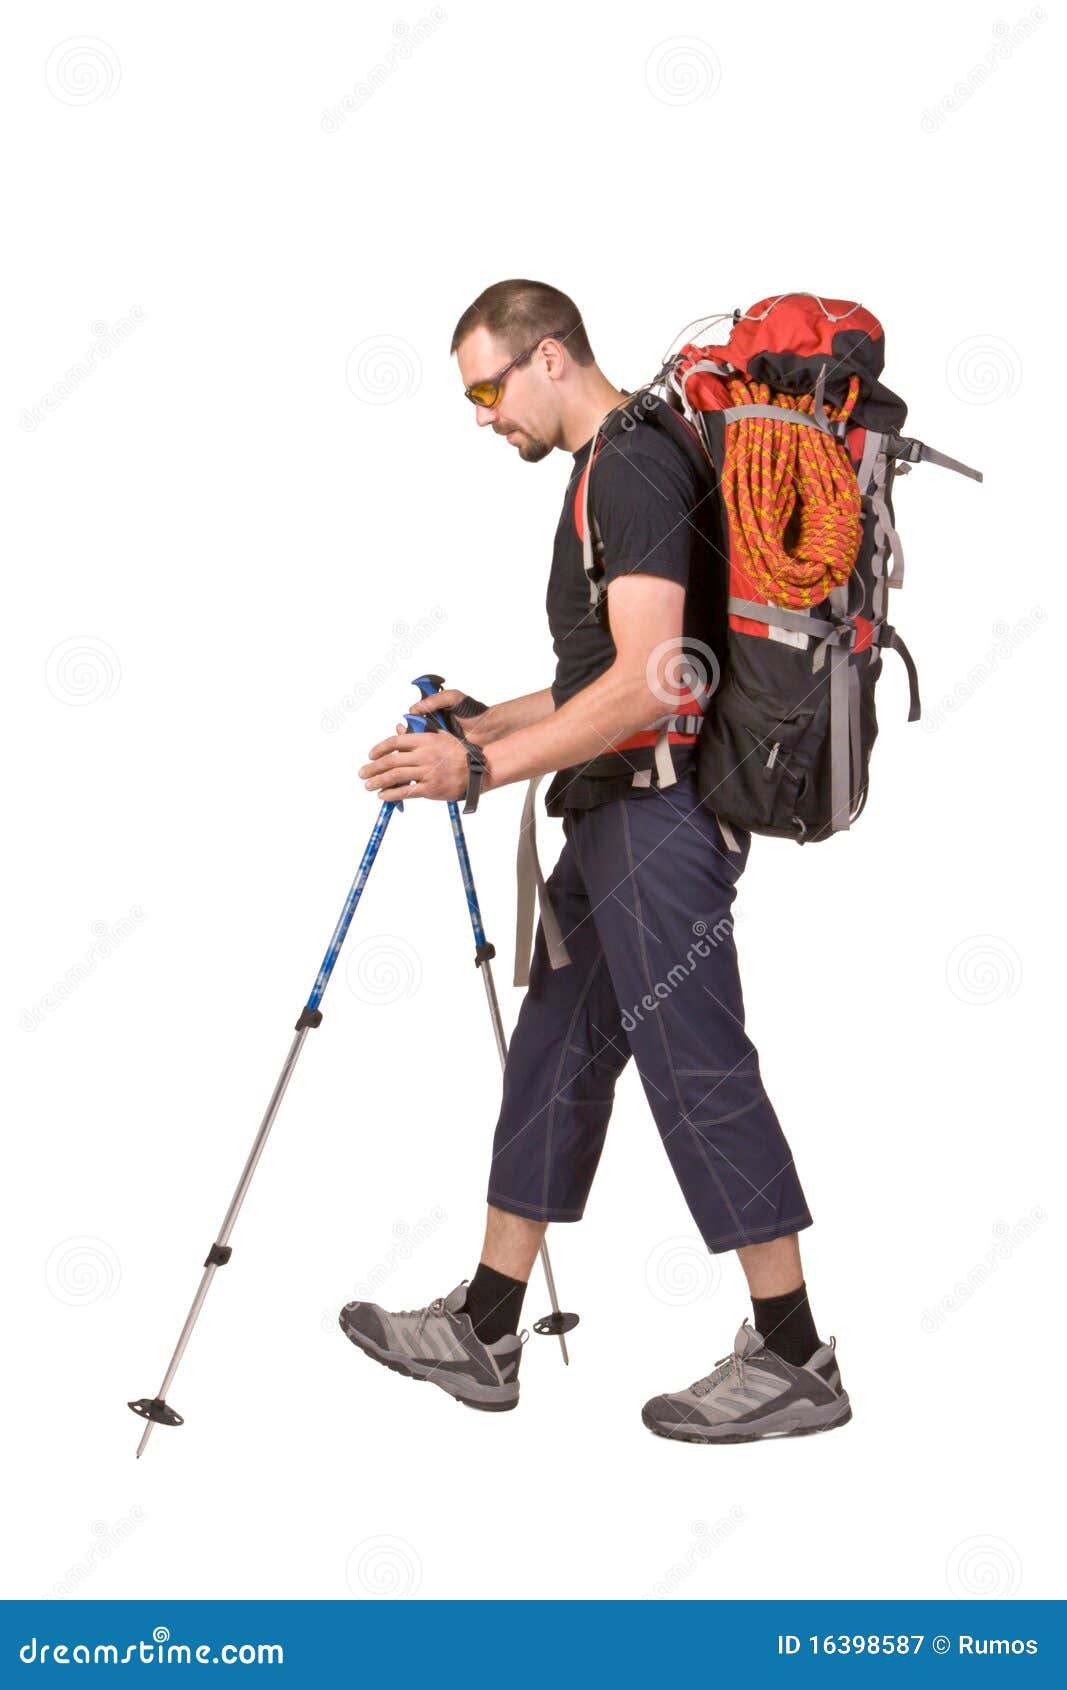 The Young Man With Backpack Stock Image - Image of hiking, path: 16398587